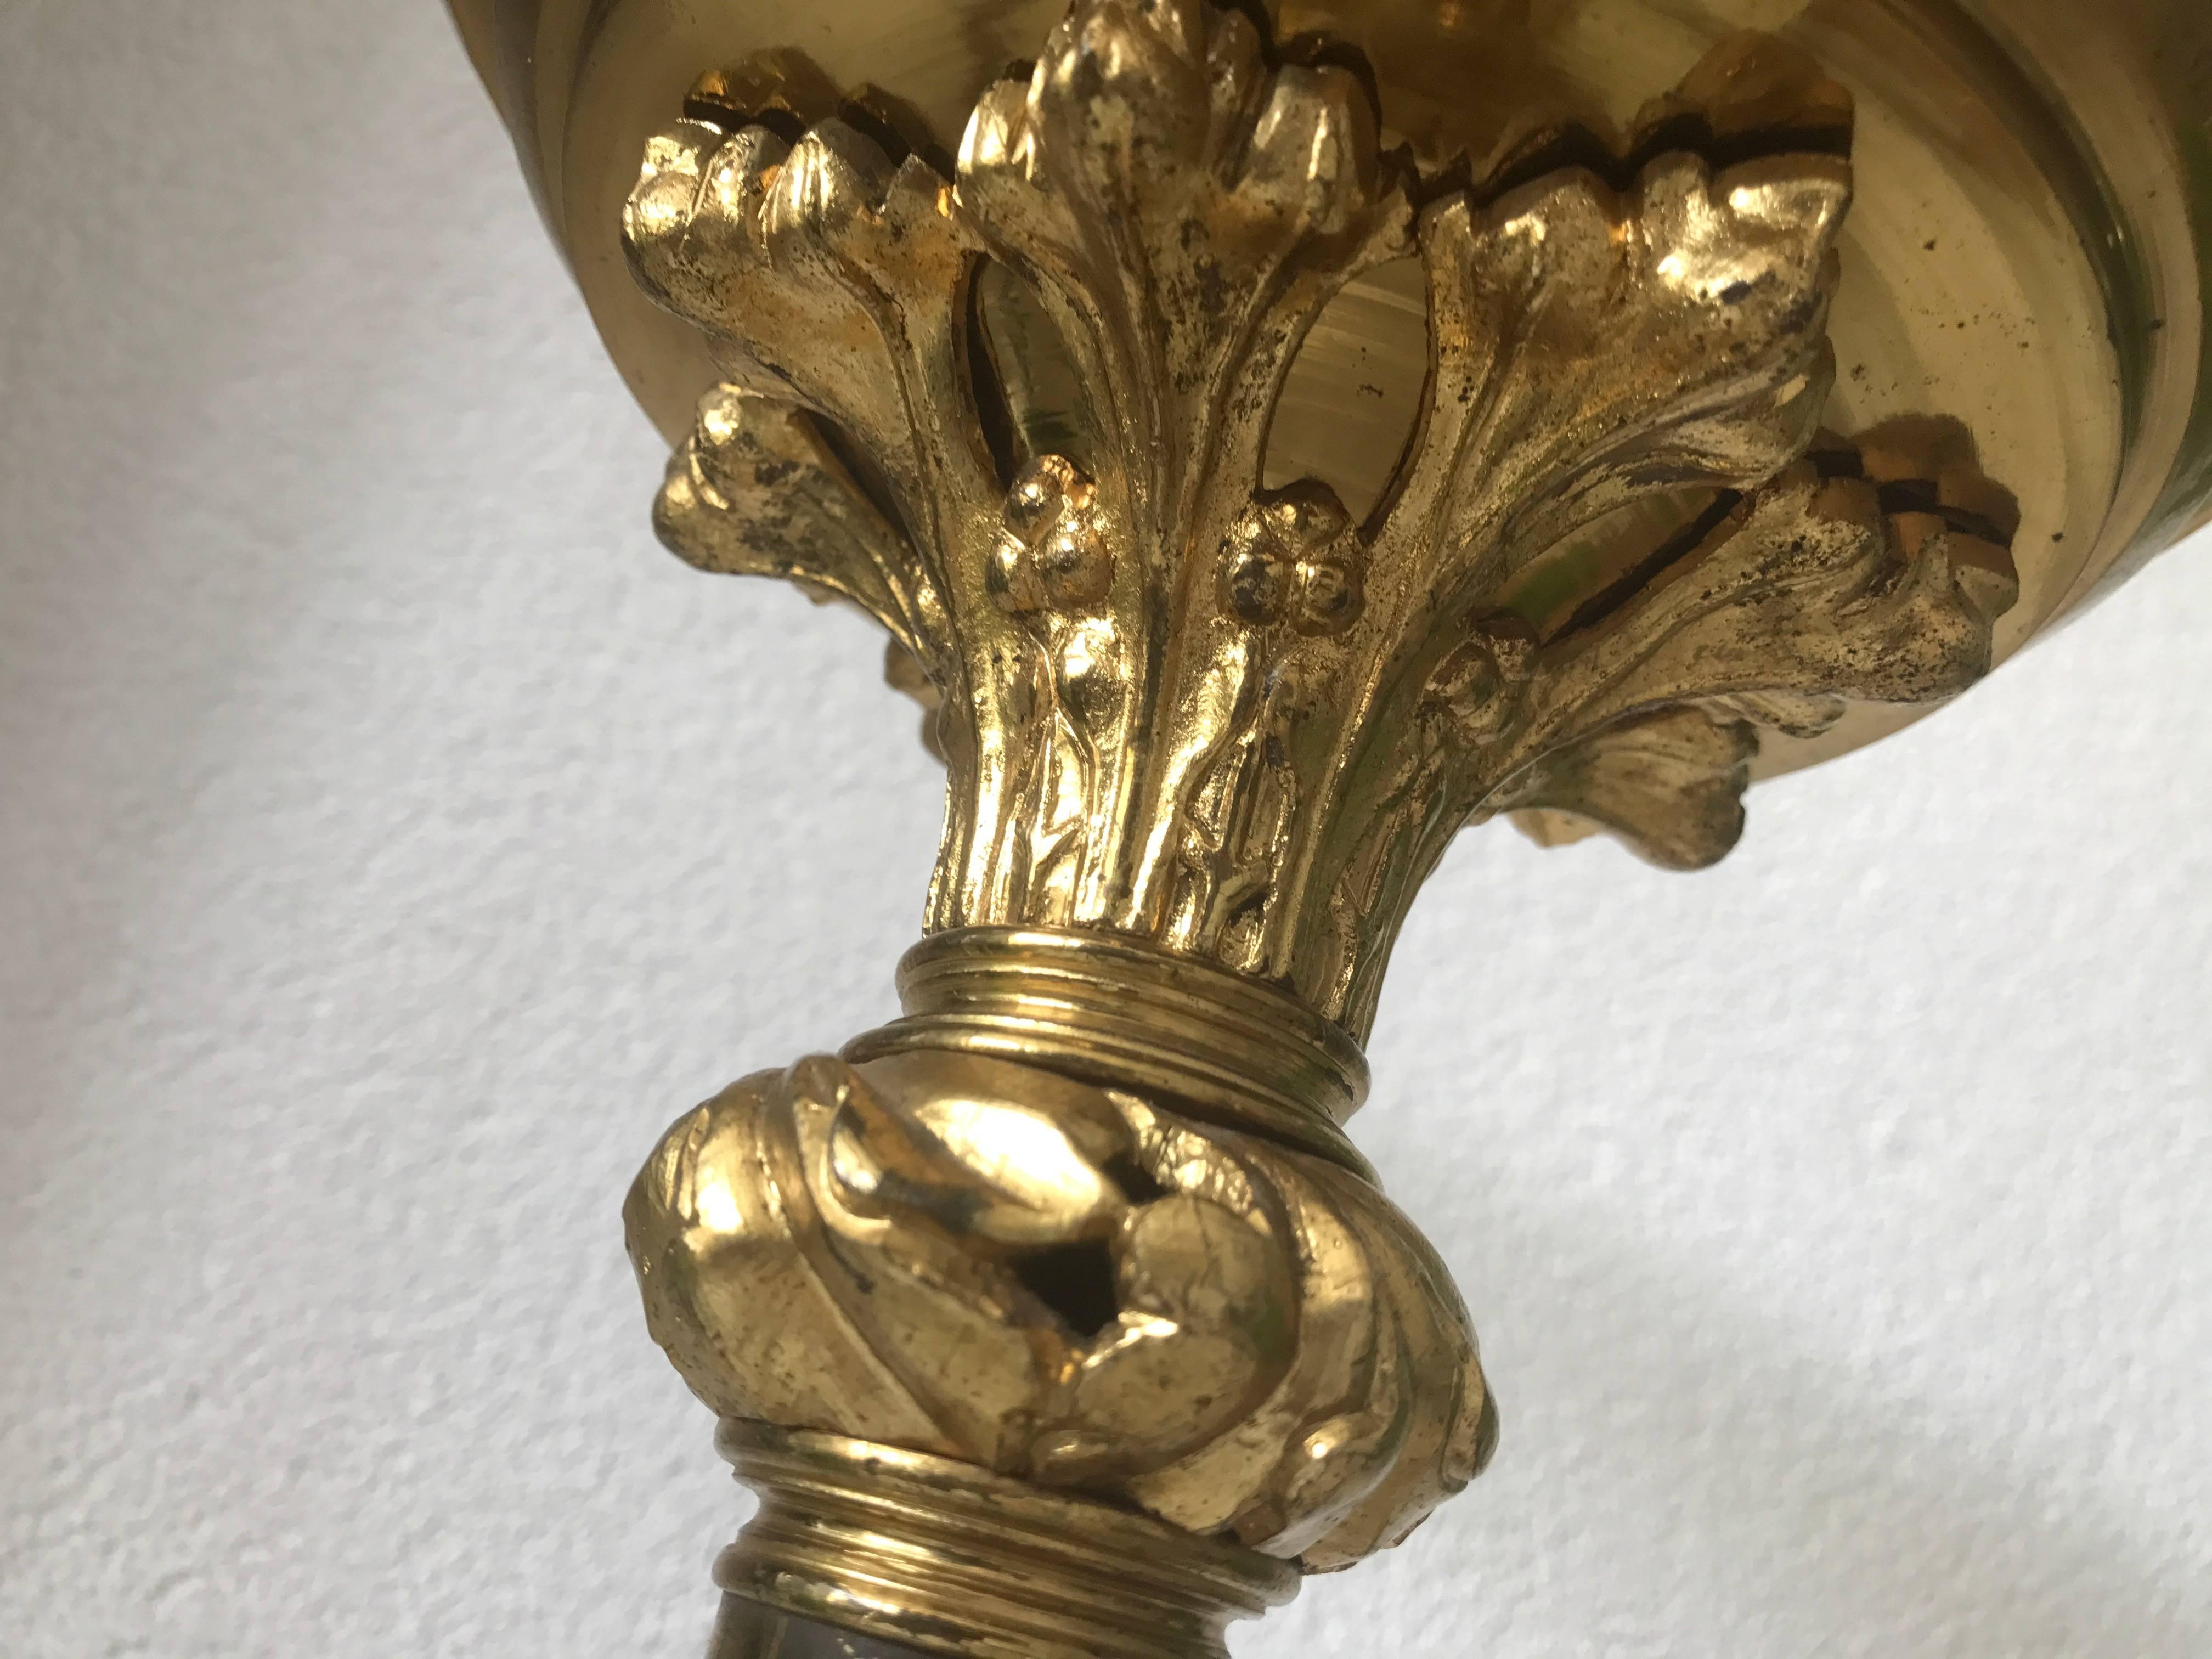 Impressive Gothic Revival Sizable Antique French Gilt Bronze Chimera Candlestick For Sale 1